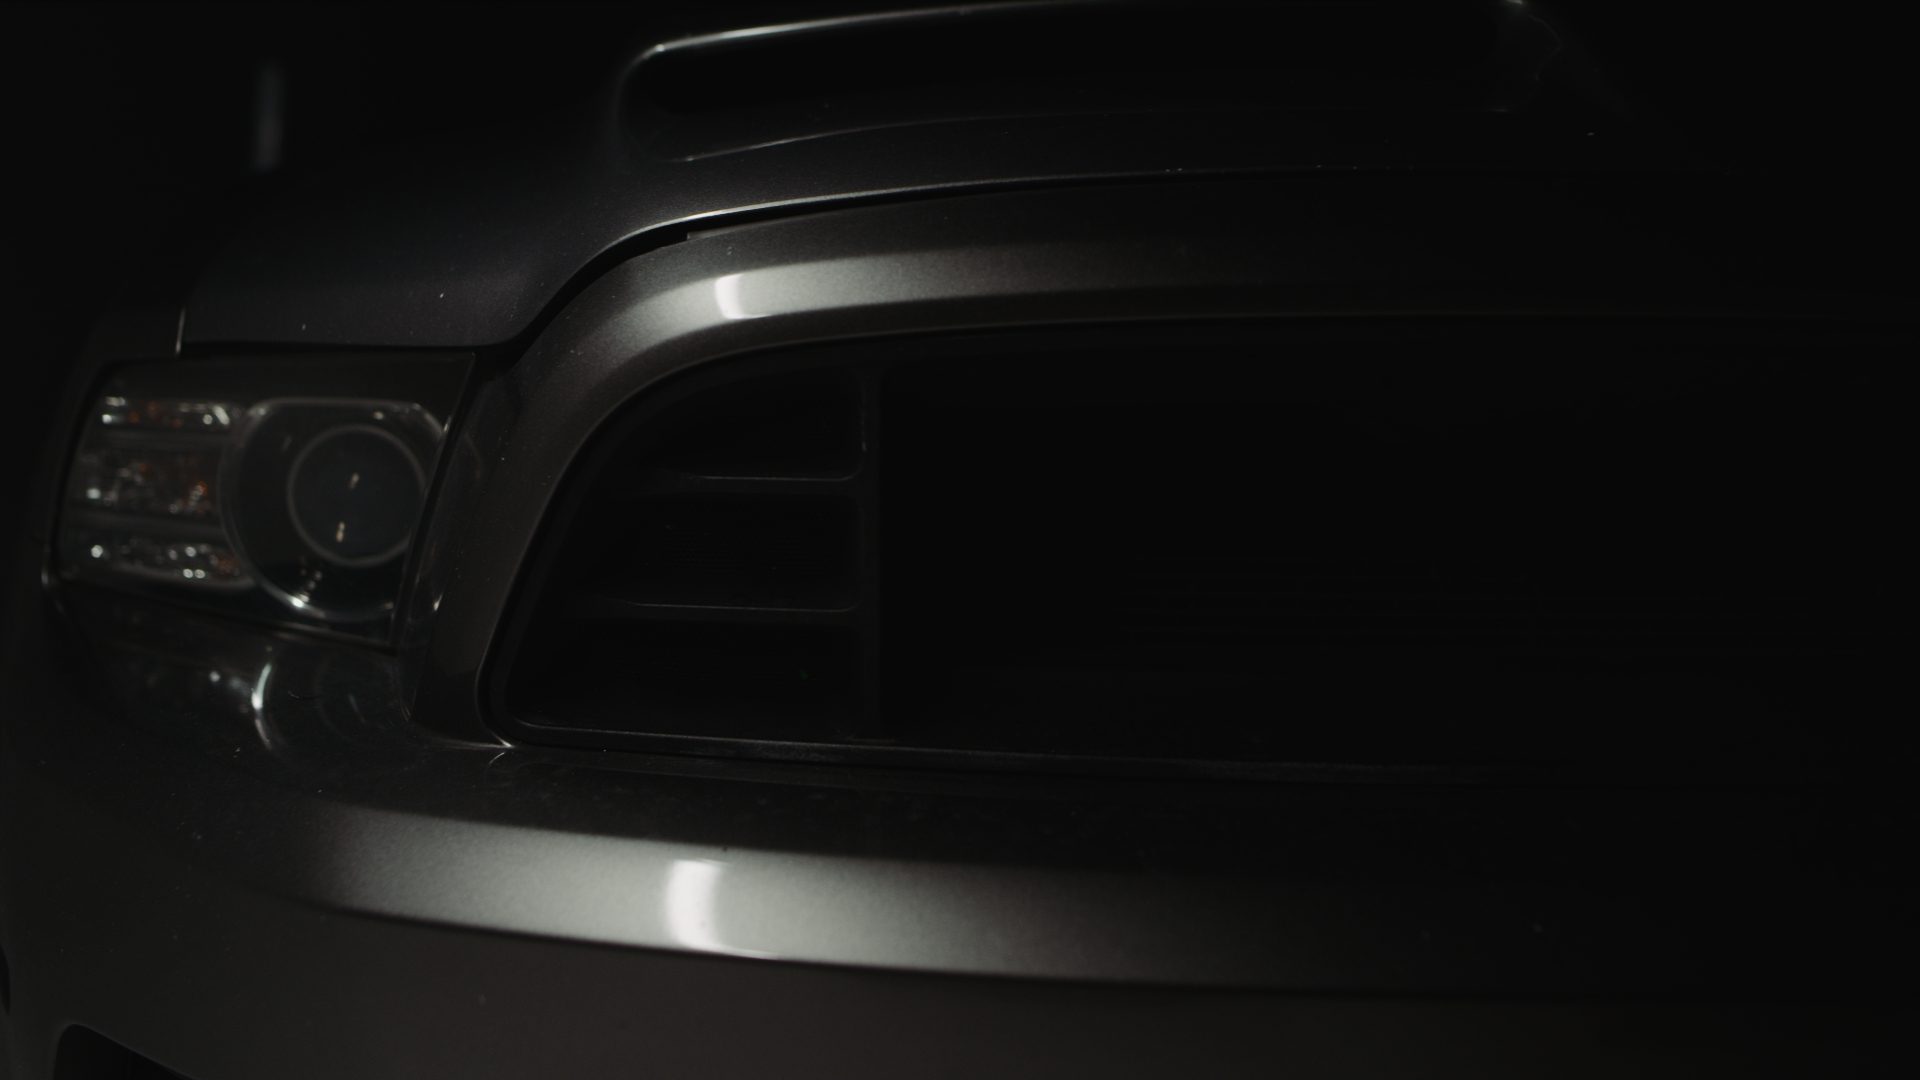 Closeup view of front of a gray car in semidarkness